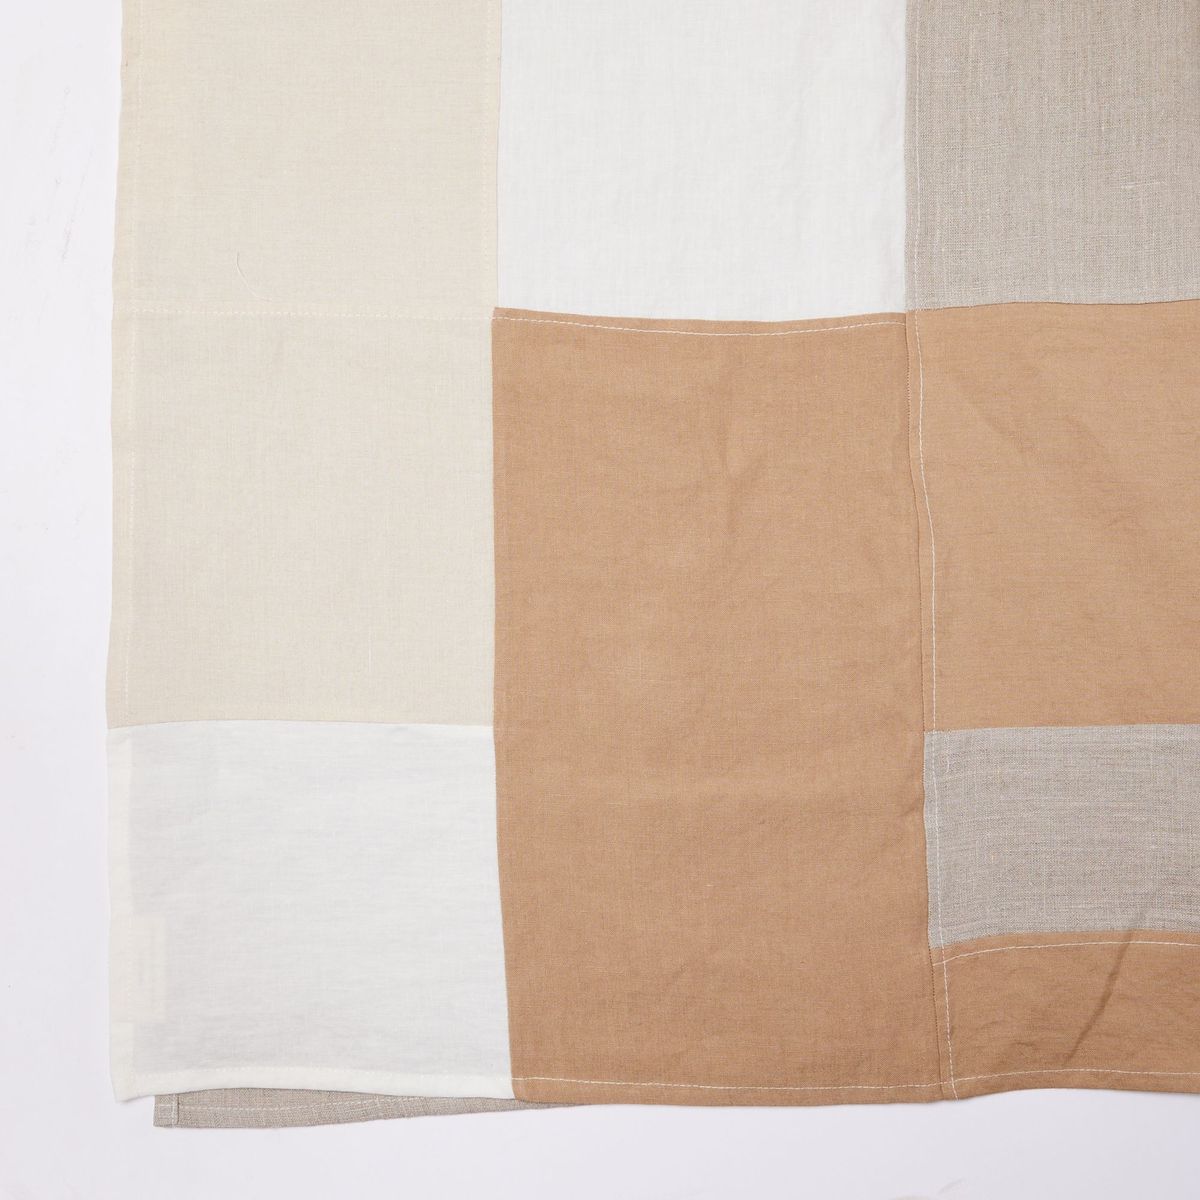 Corner of tablecloth with tan, white, beige, rectangular shapes